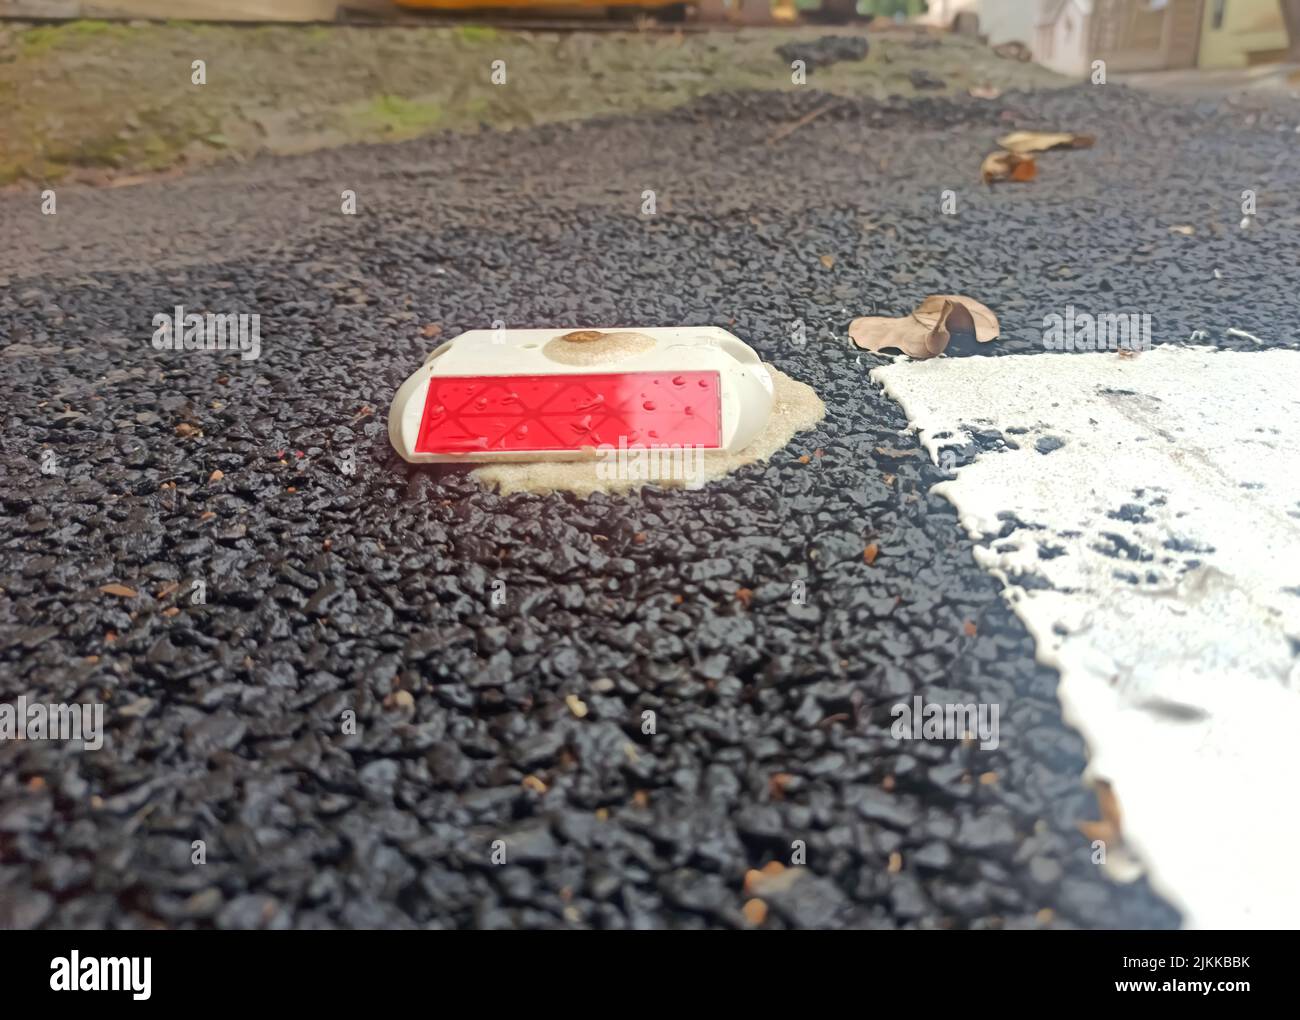 A Selective focus Picture of a Road Reflector installed on Road In India. Road Reflectors guide the Vehicles in dark and avoid accidents. Stock Photo